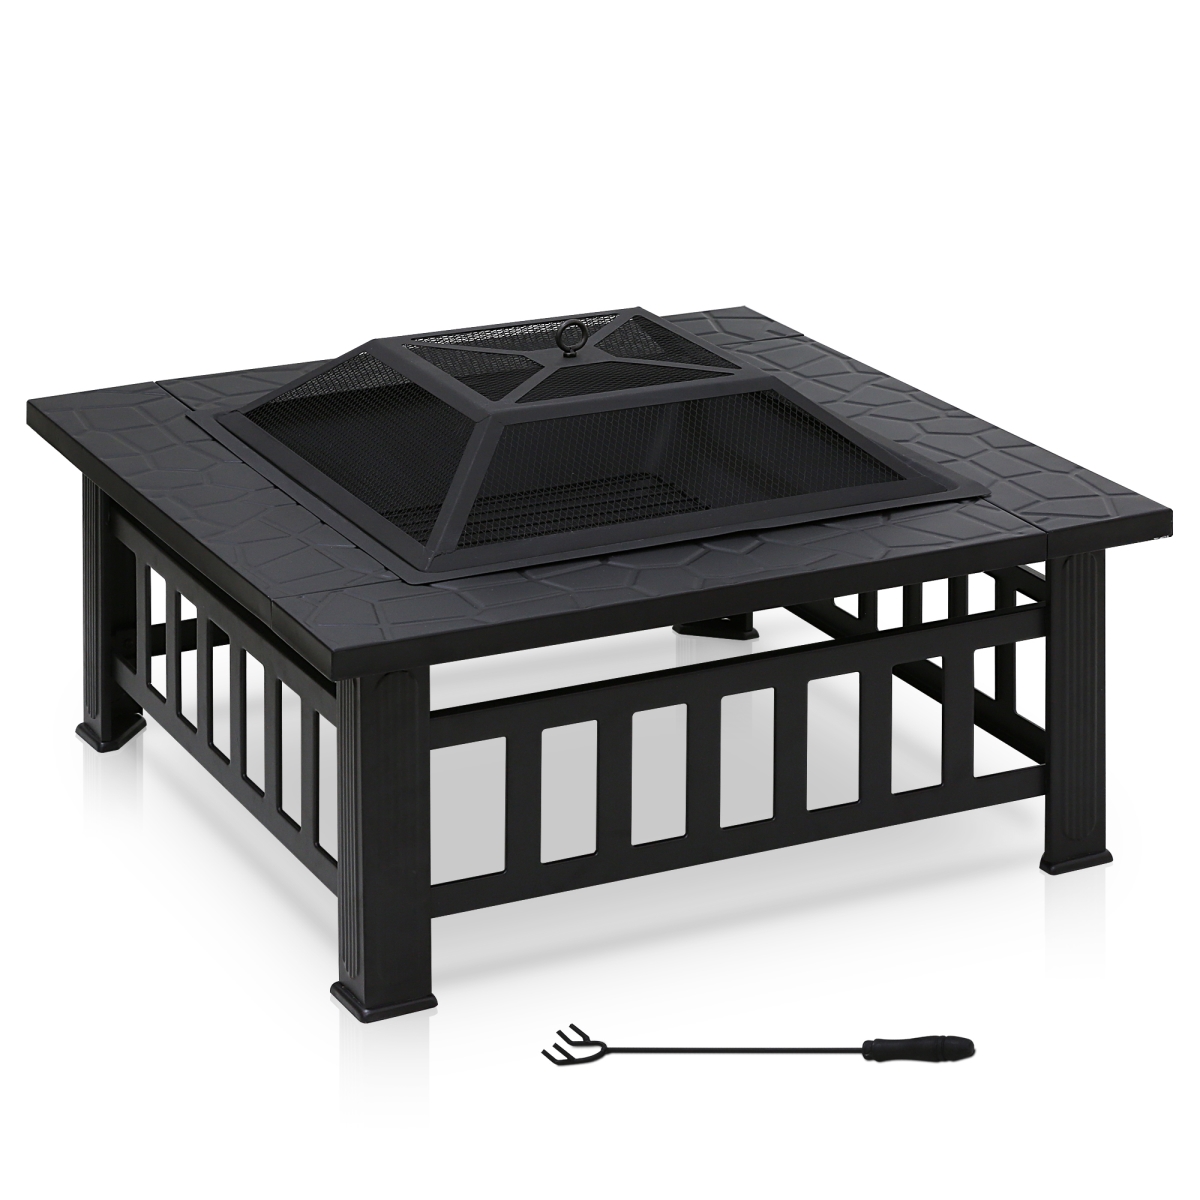 Fpt17039 Outdoor Square Fire Pit, Black